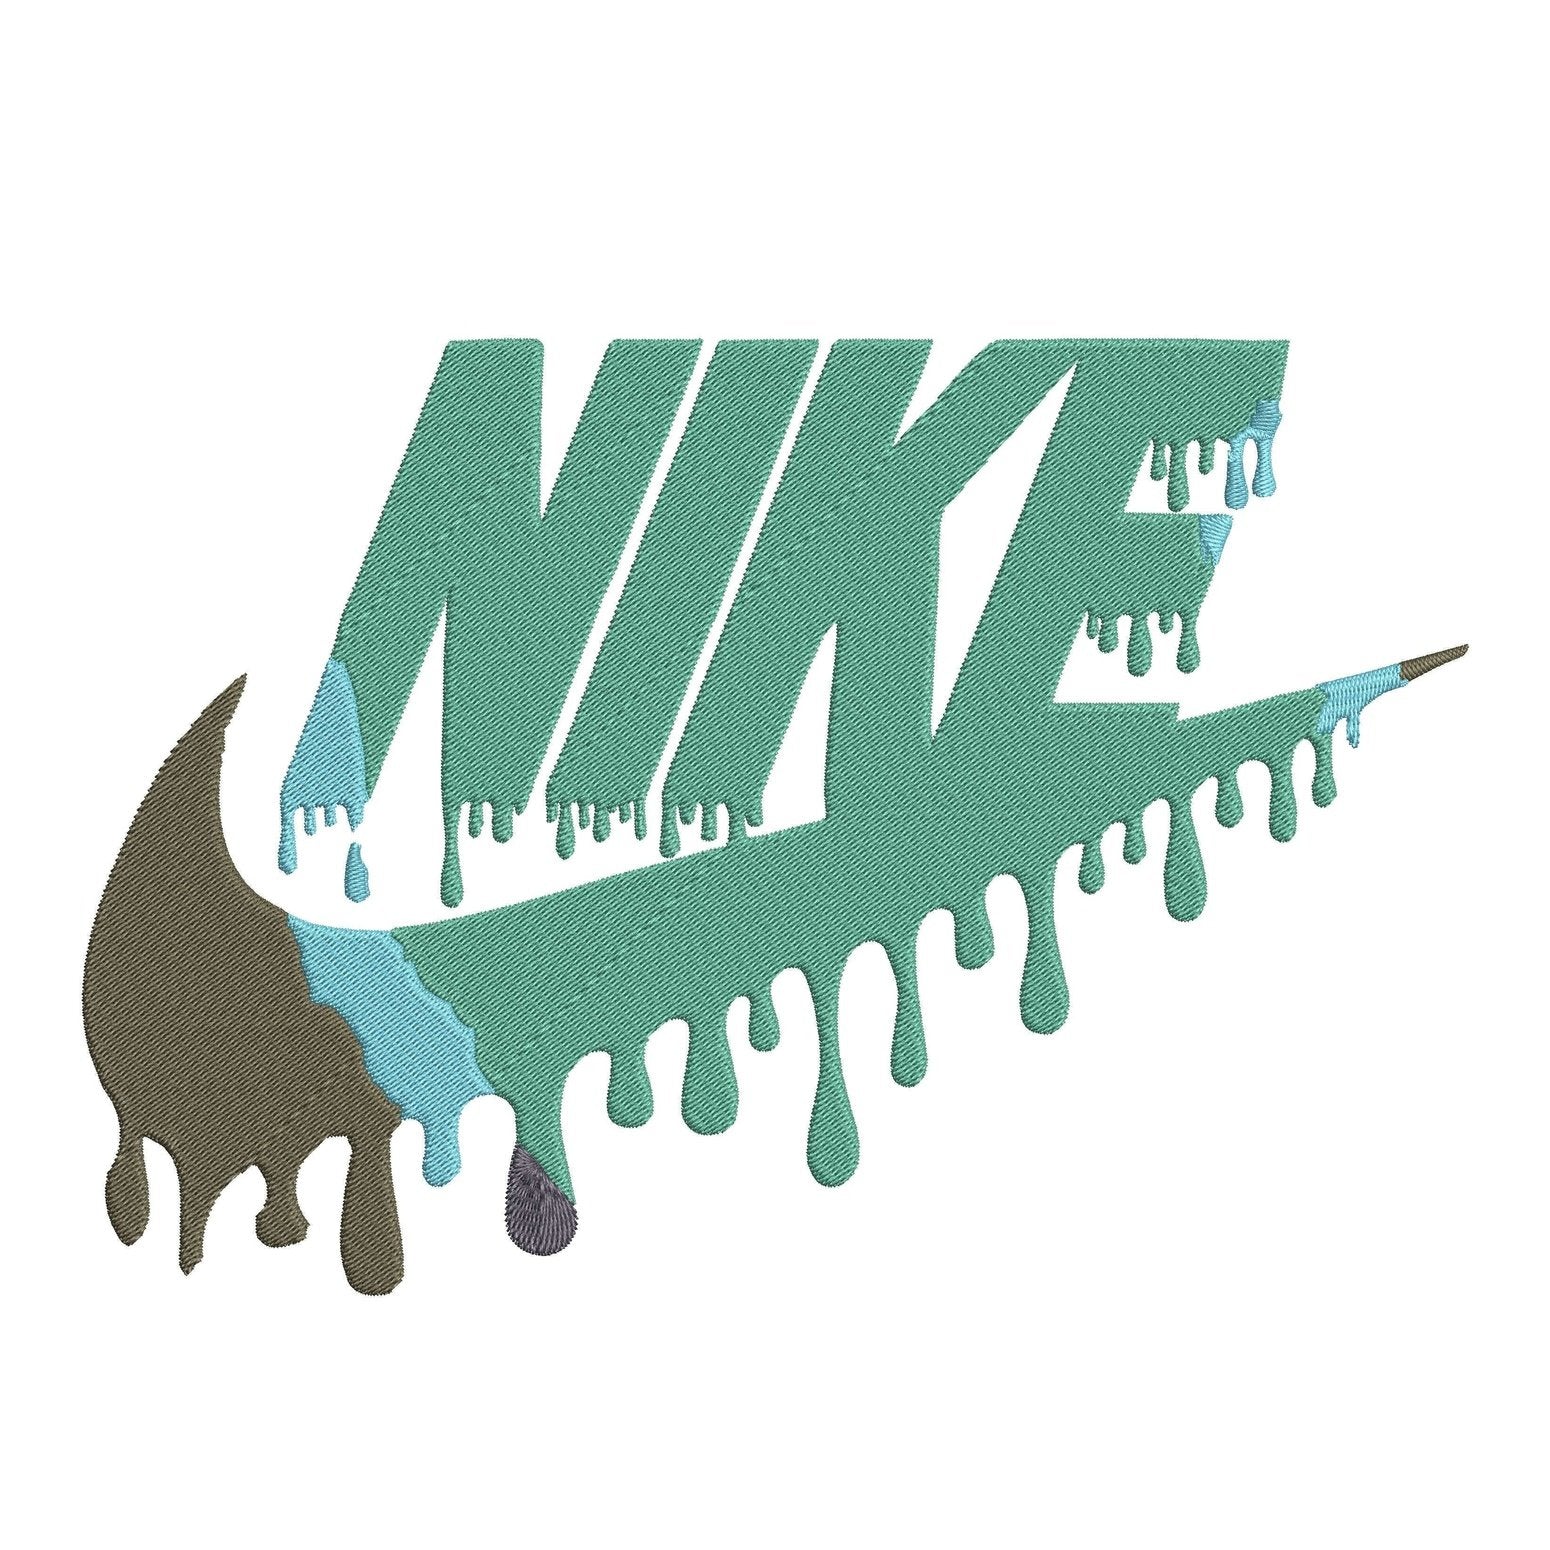 Nike Melted - Embroidery Design FineryEmbroidery